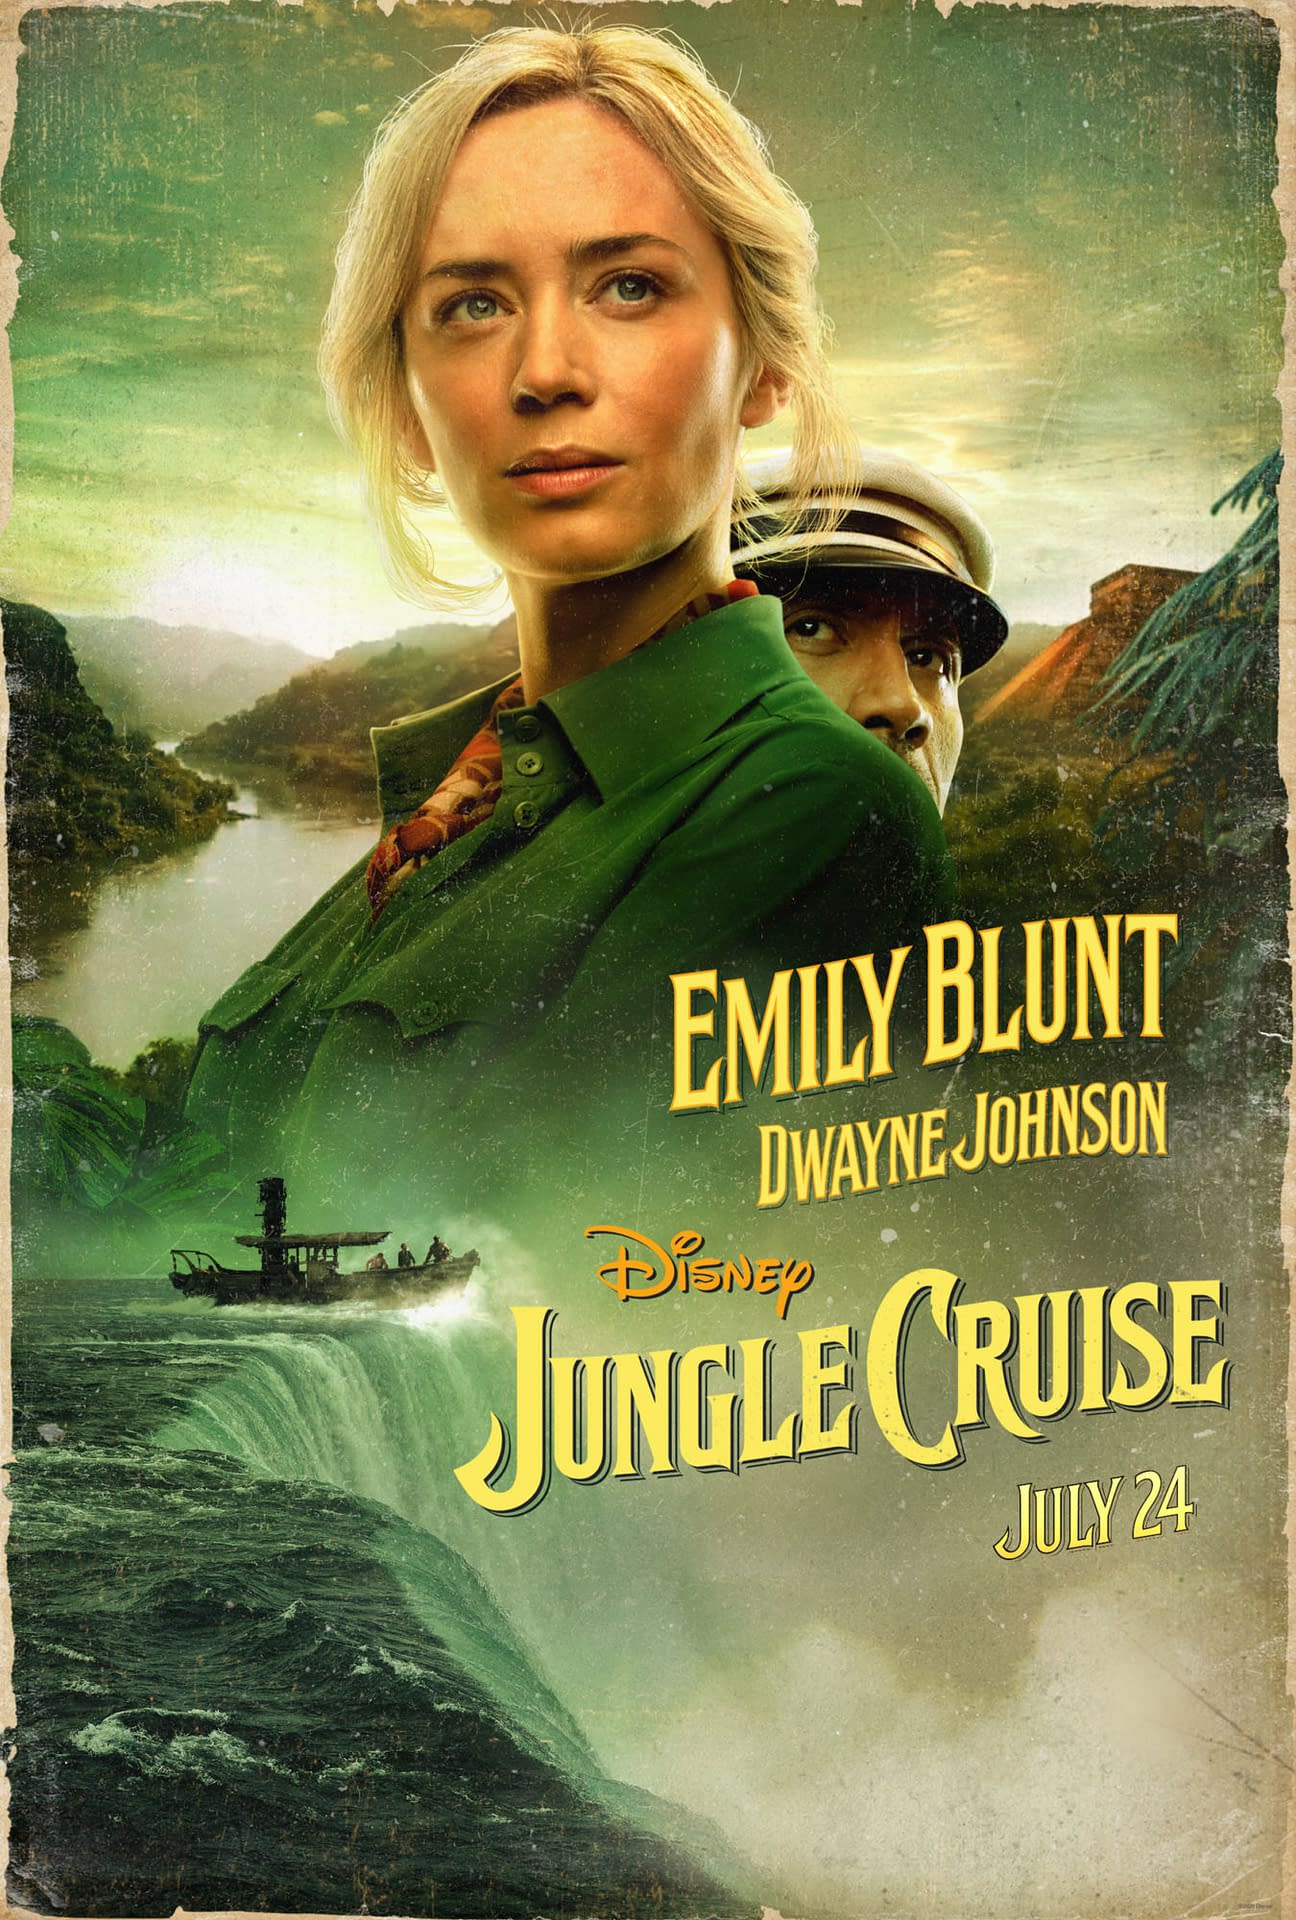 "Jungle Cruise" New Trailer Tomorrow, 2 New "His and Her" Posters